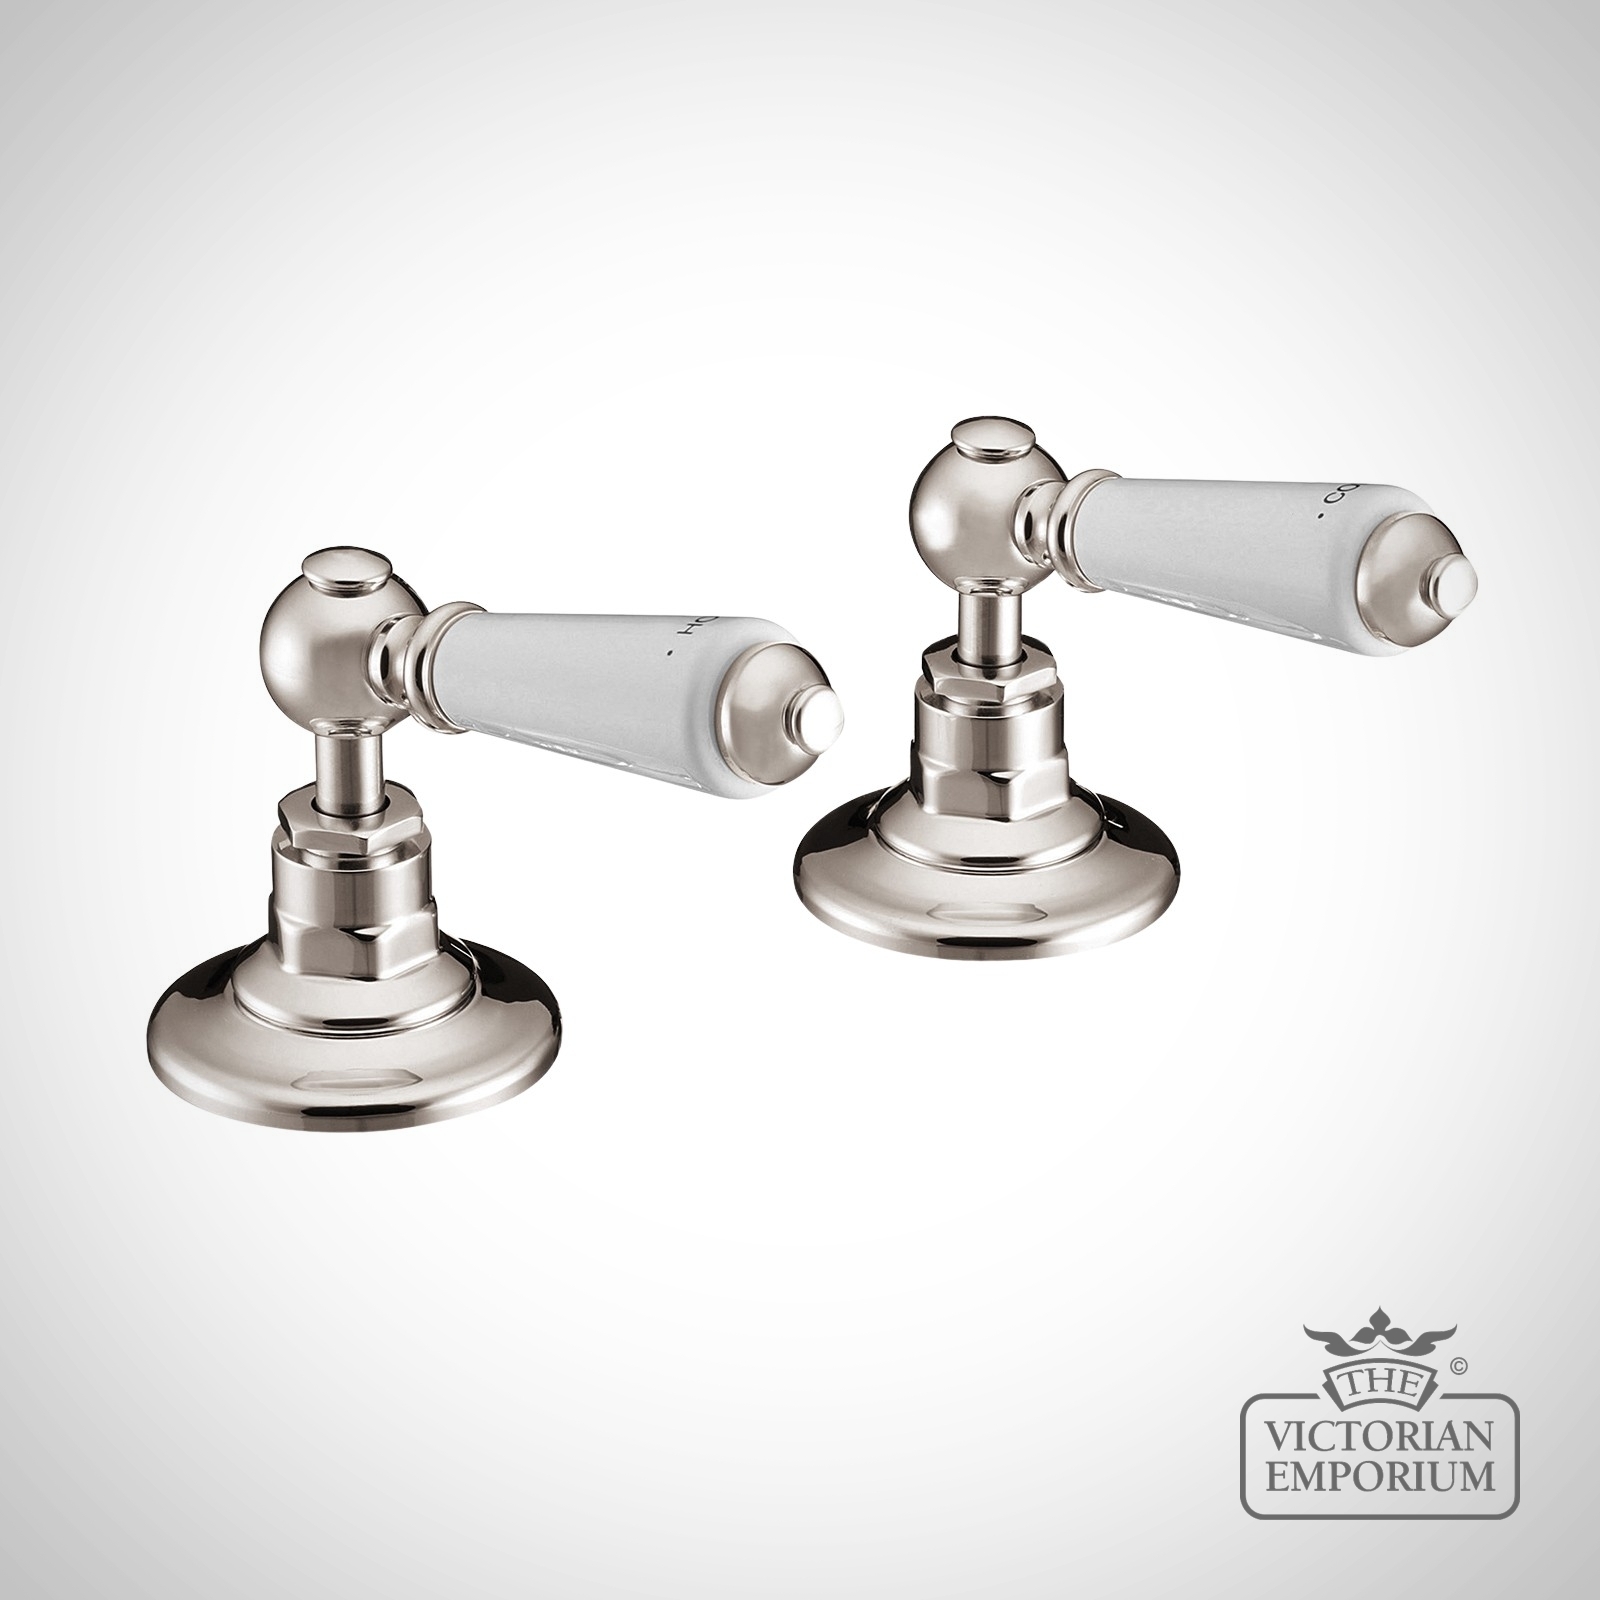 Deck Mounted Bath Valves With Ceramic Lever - in Chrome, Nickel or Copper